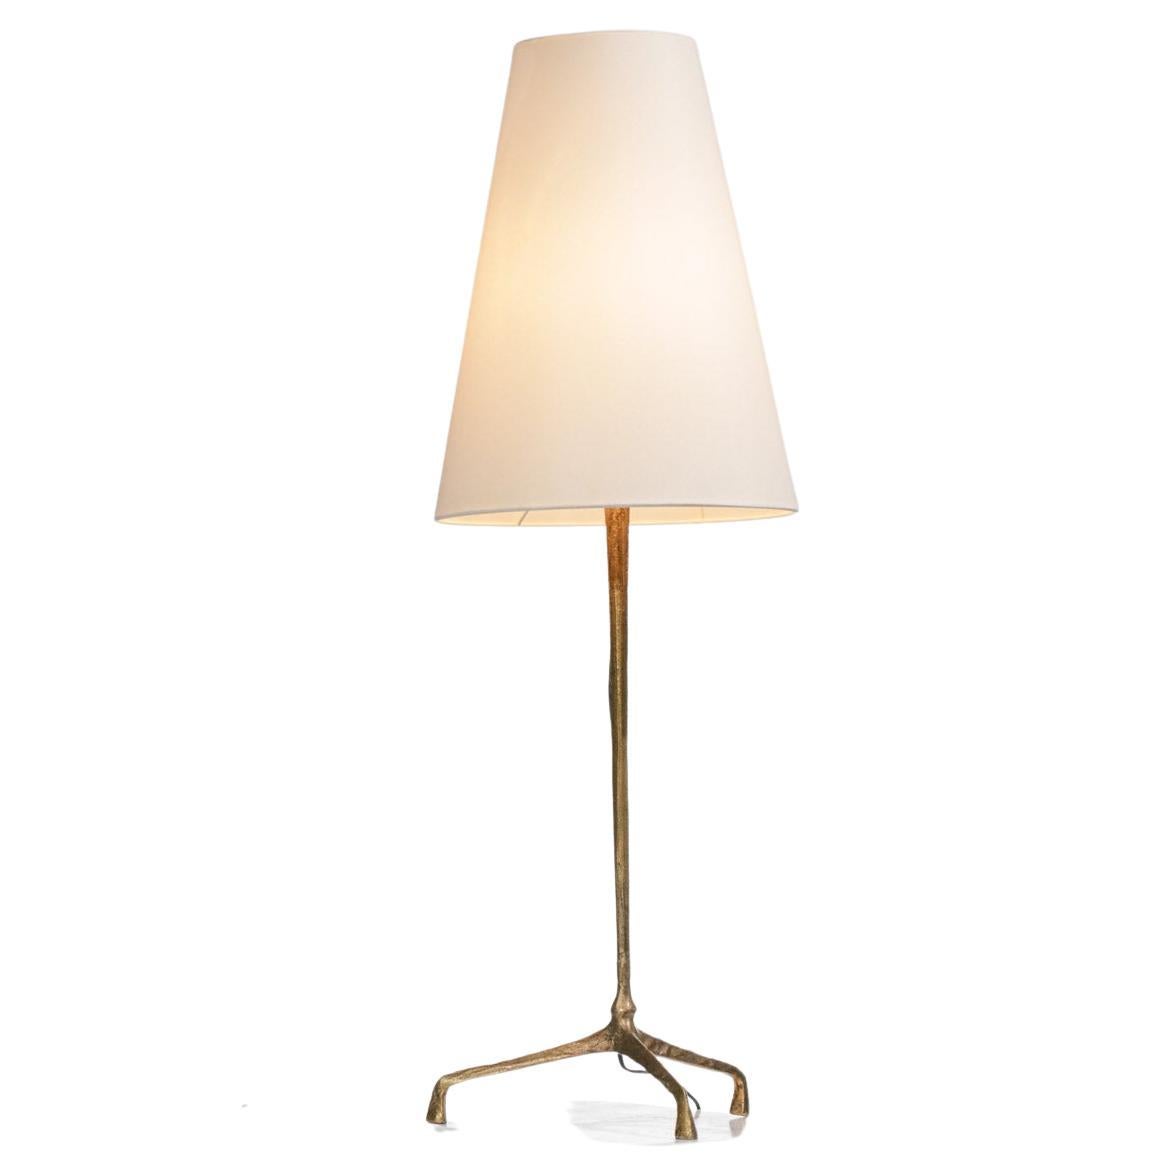 French Large Table Lamp by Felix Agostini in Gilded Bronze 50's - F423